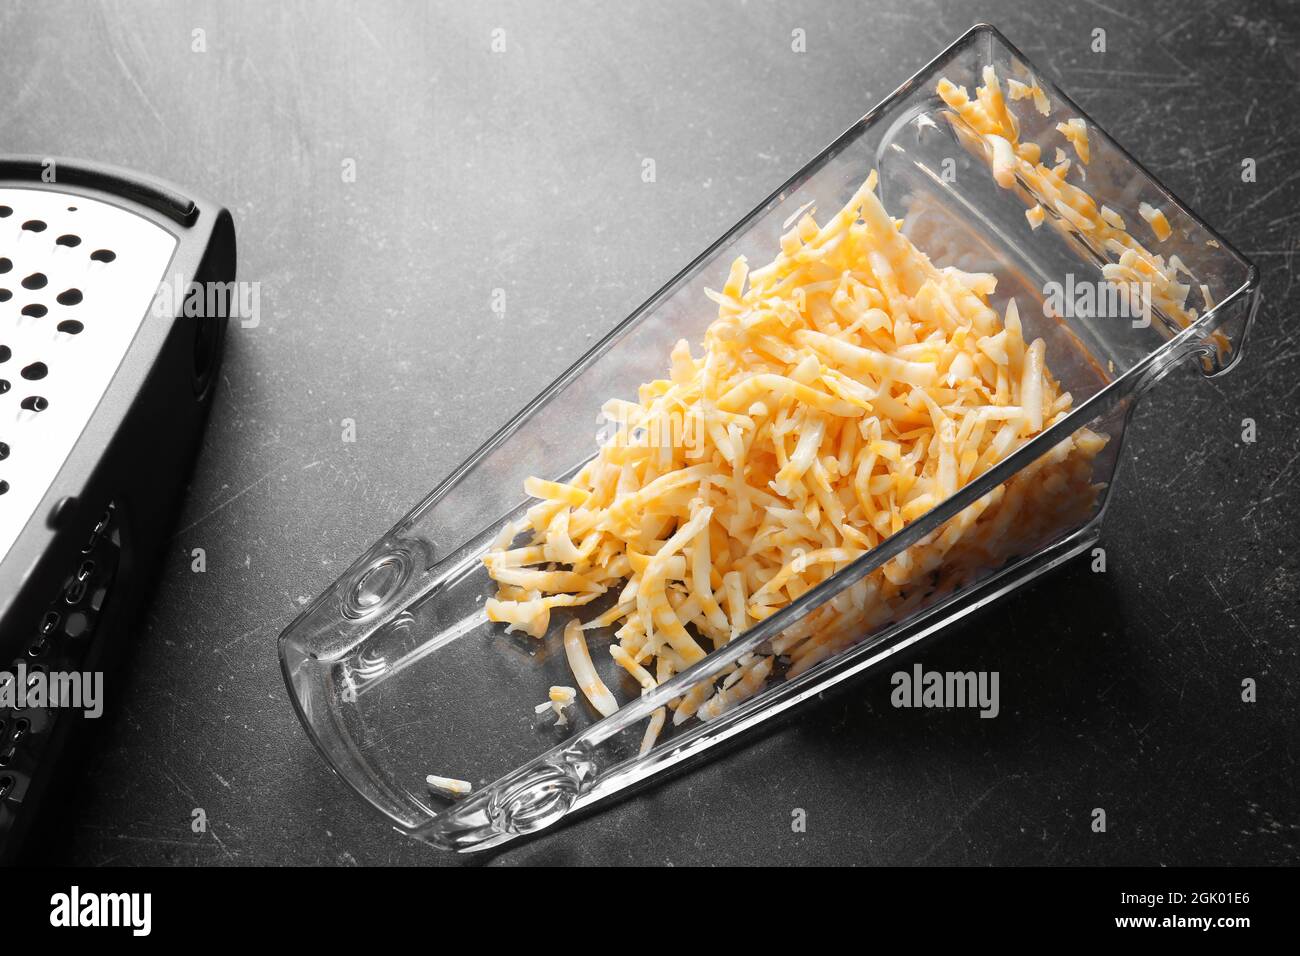 https://c8.alamy.com/comp/2GK01E6/grated-cheese-in-plastic-container-on-table-2GK01E6.jpg